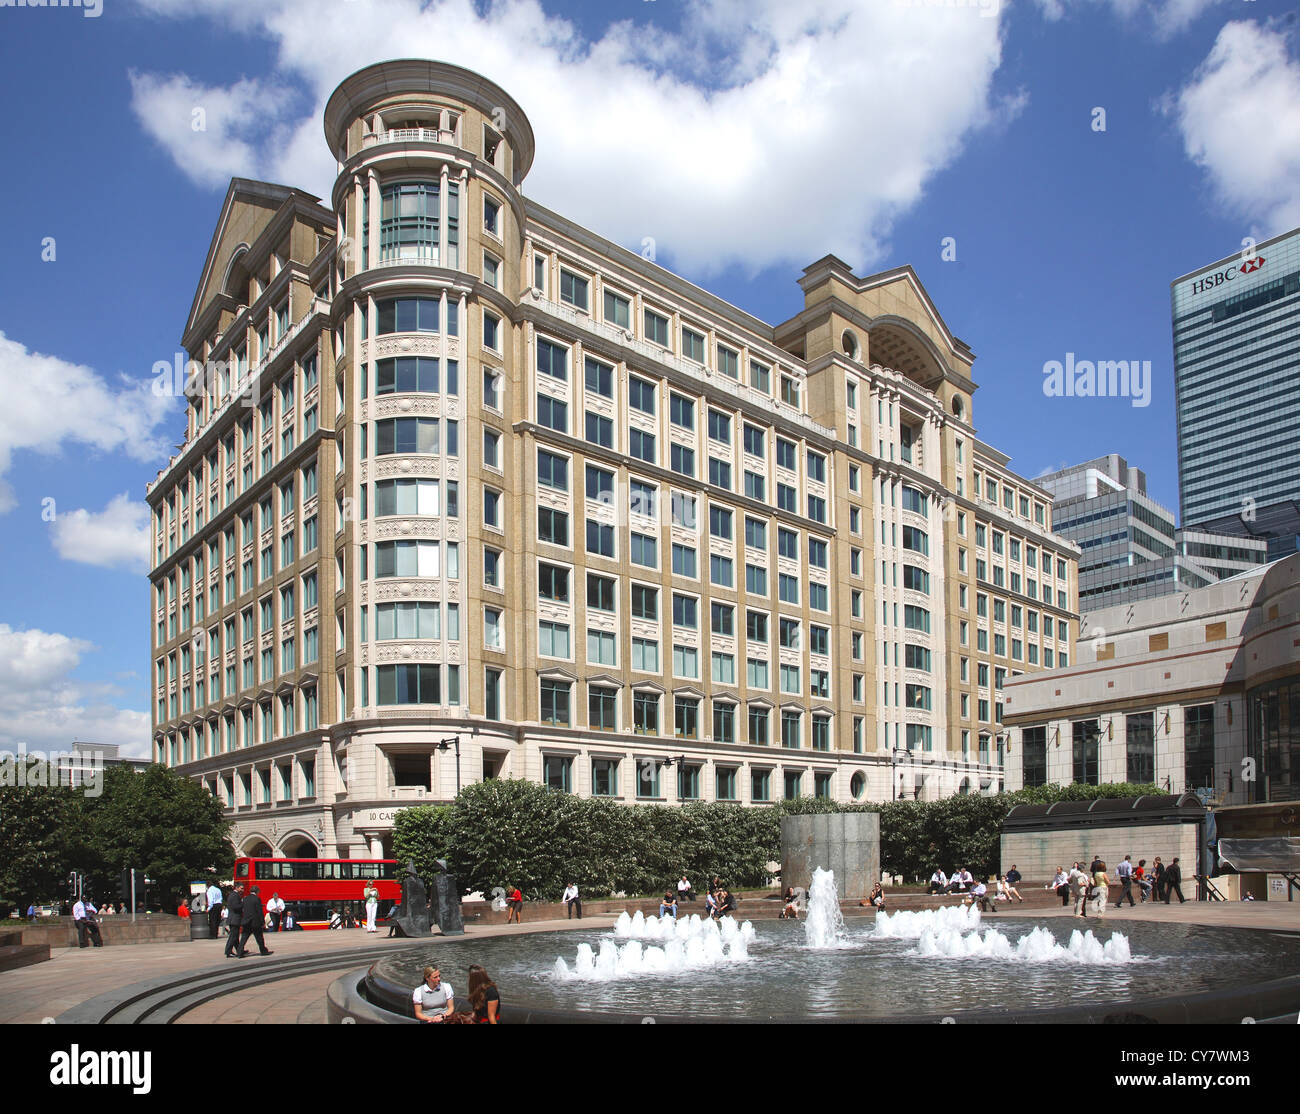 Cabot Square in London's Canary Wharf development showing fountains and surrounding buildings Stock Photo